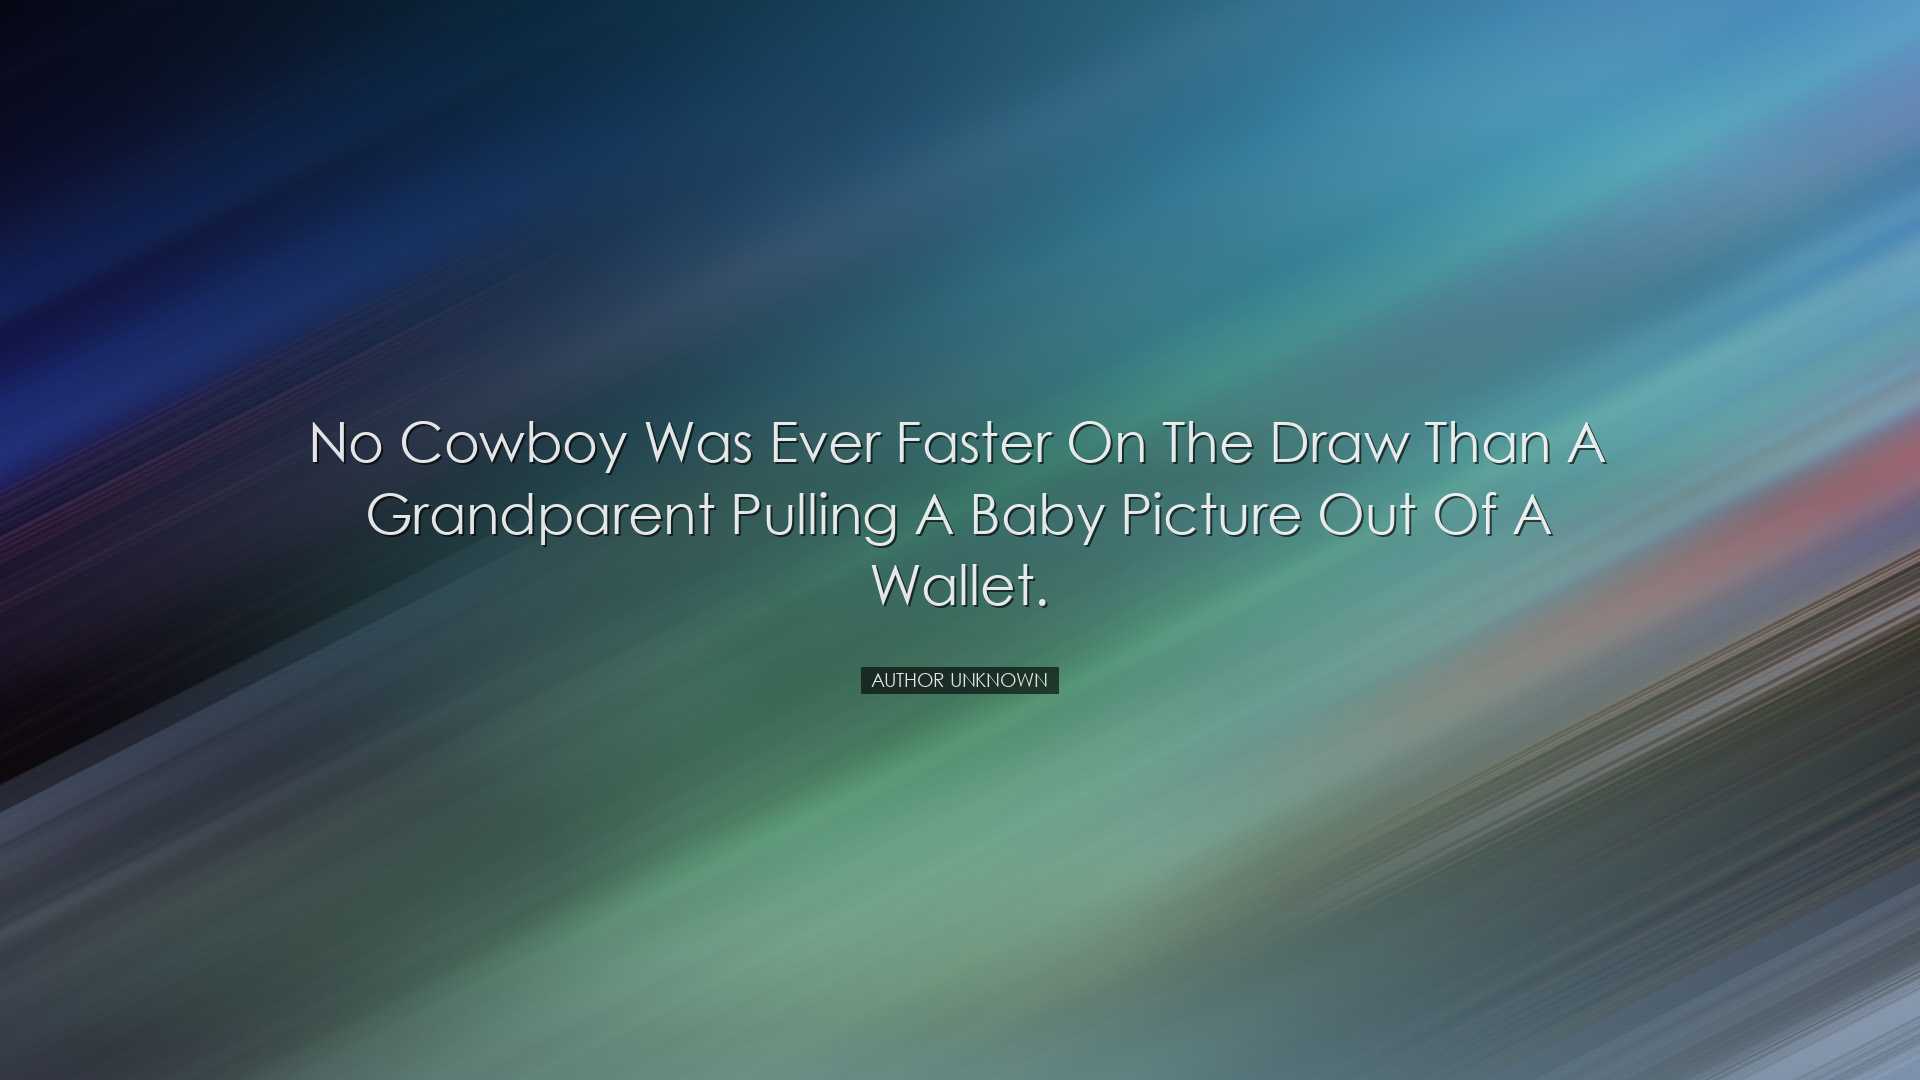 No cowboy was ever faster on the draw than a grandparent pulling a